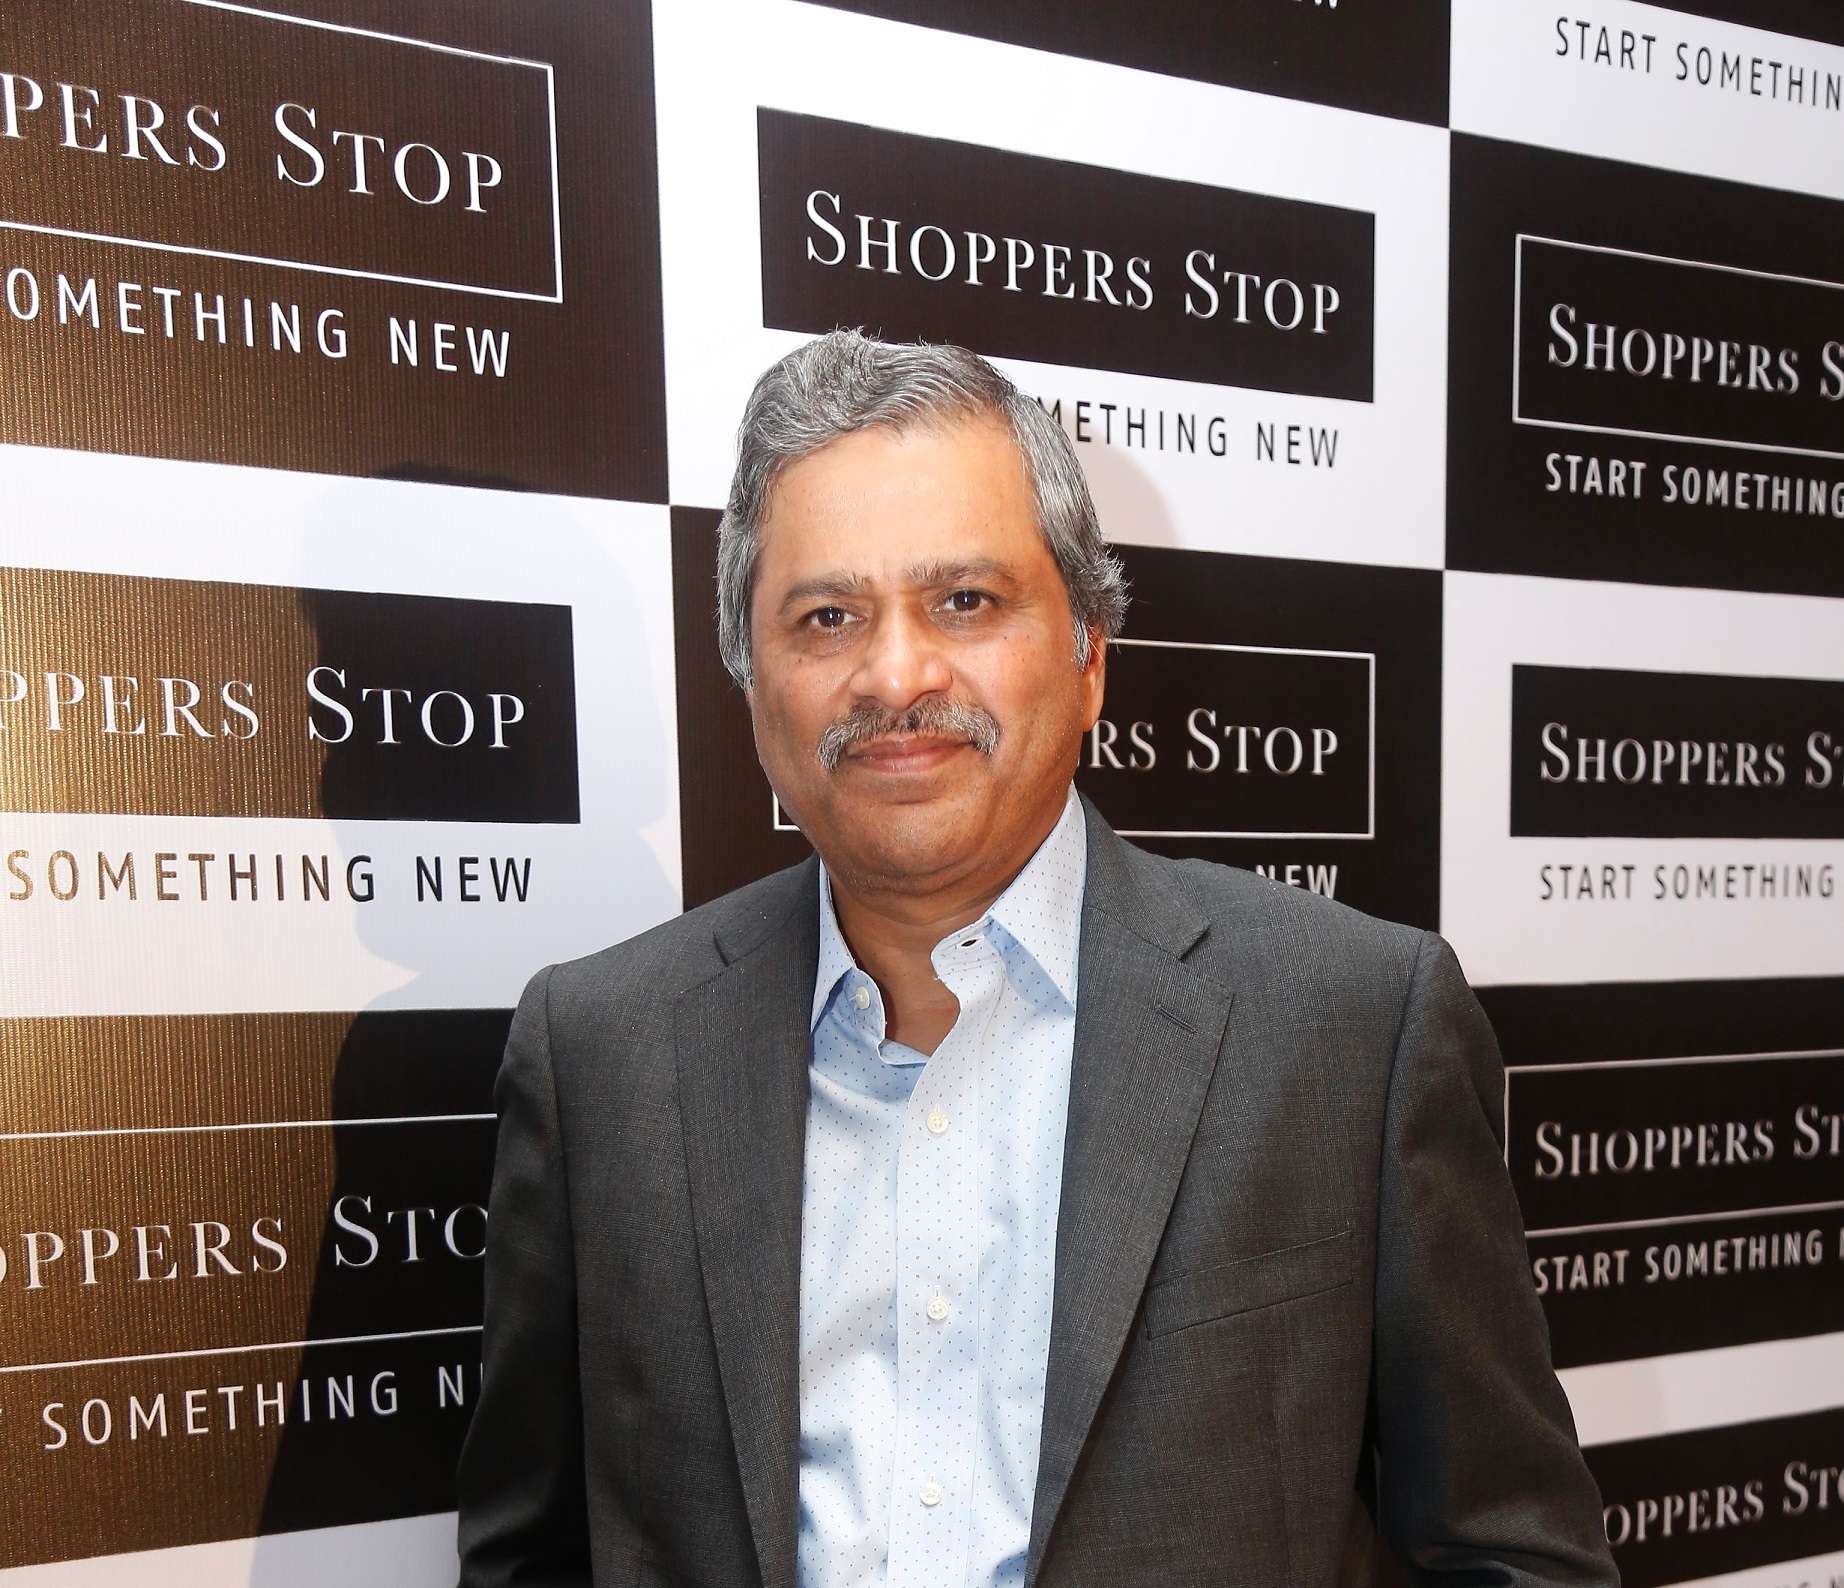 Shoppers Stop to invest Rs 120 crore on expansion, renovation this